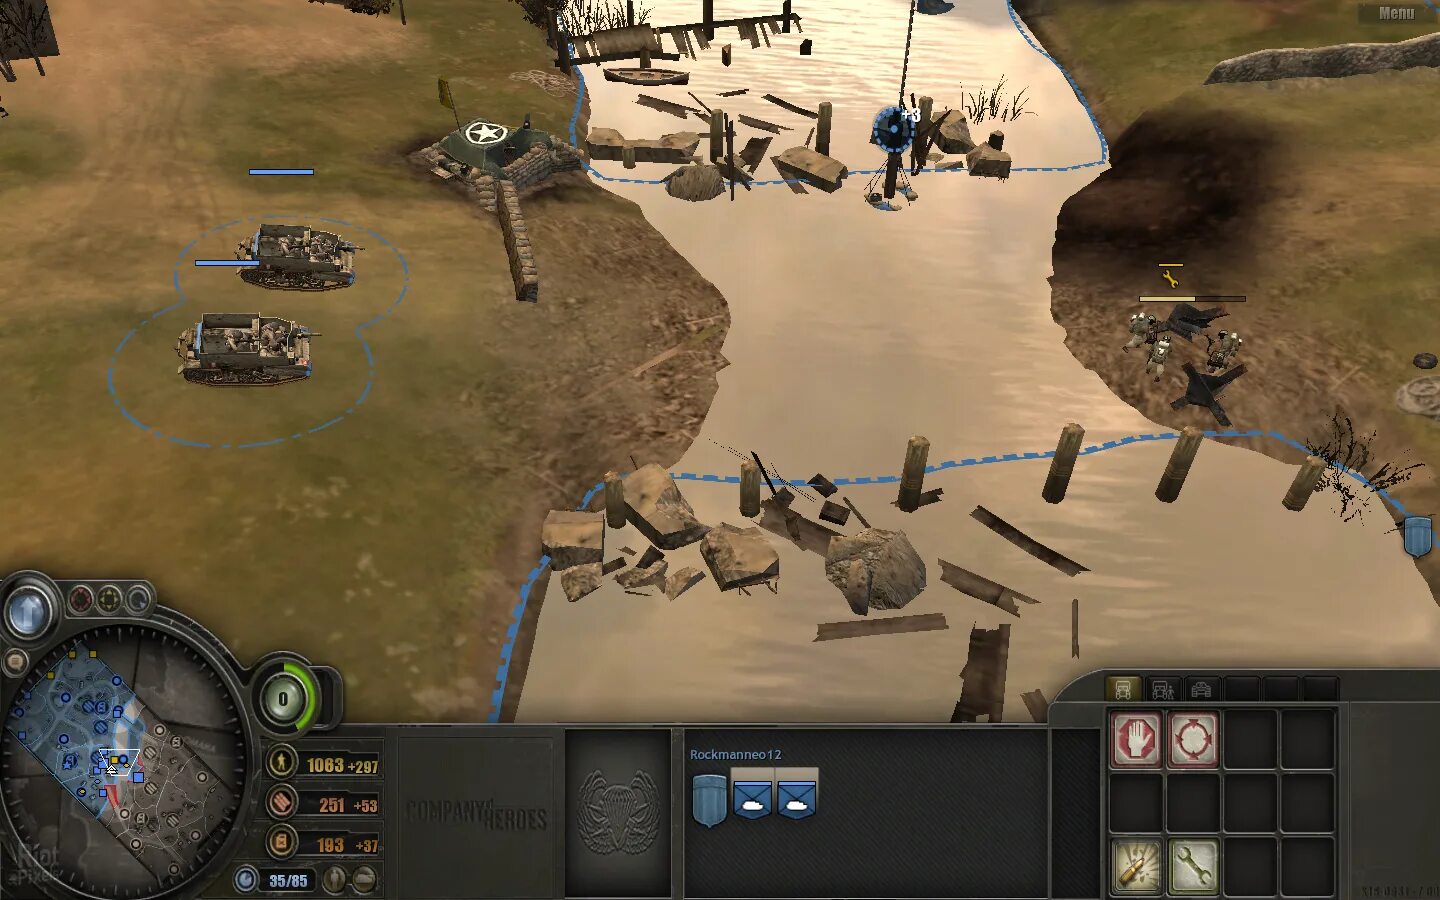 Company of heroes opposing. Company of Heroes opposing Fronts. Company of Heroes 2007. Company of Heroes — opposing Fronts (2007). Company of Heroes Tales of Valor opposing Fronts.